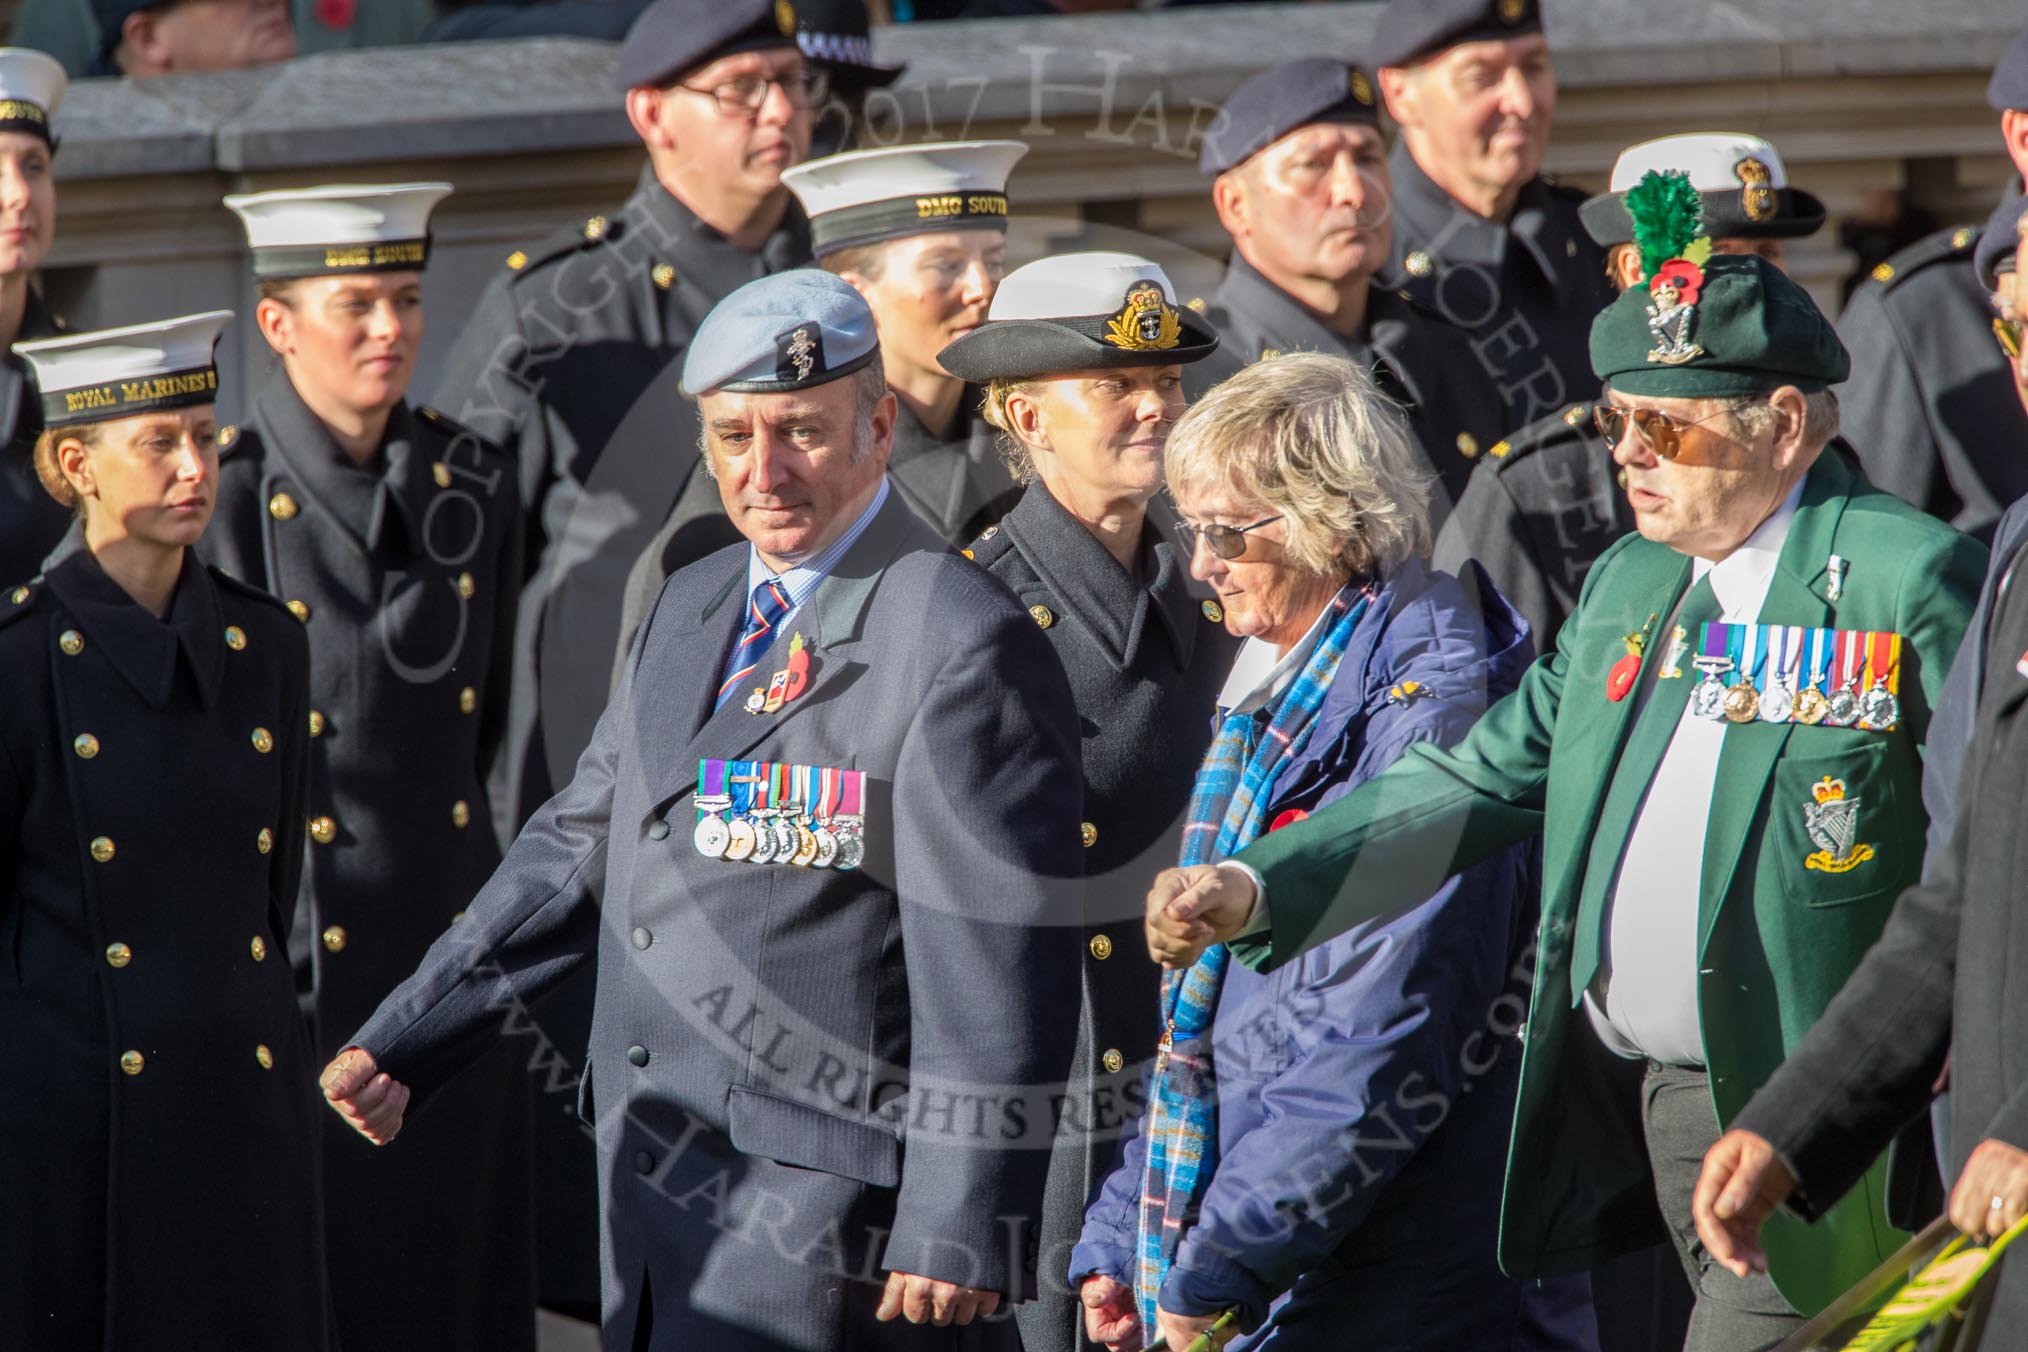 Blind Veterans UK (Group AA7, 215 members) during the Royal British Legion March Past on Remembrance Sunday at the Cenotaph, Whitehall, Westminster, London, 11 November 2018, 12:05.